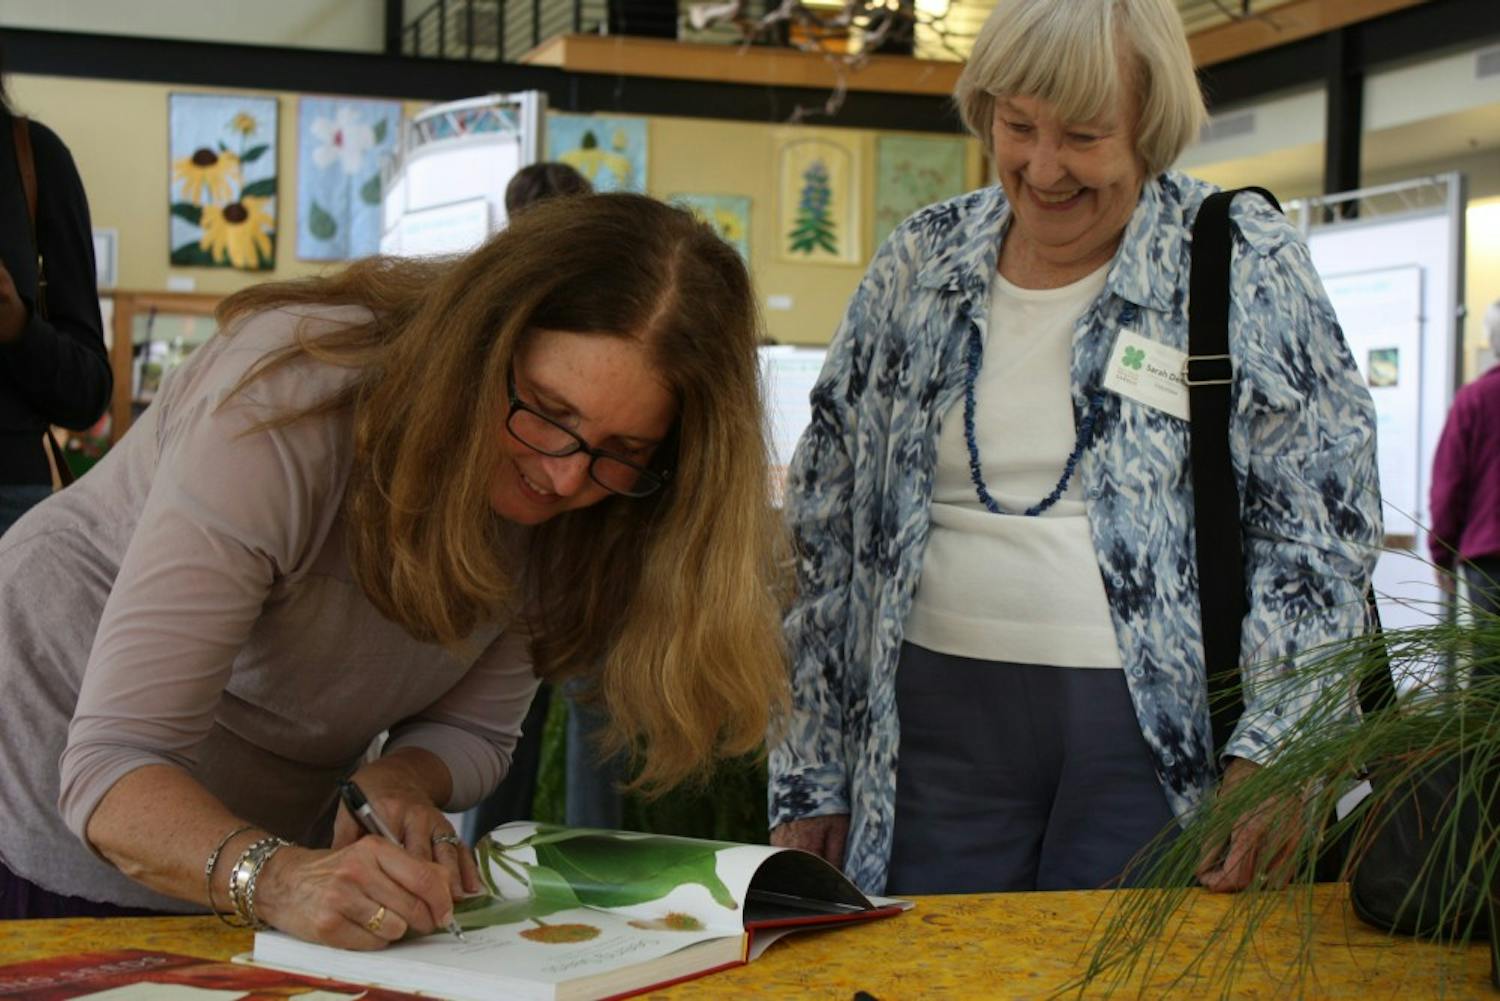 Sarah Dendy of Durham has her copy of "Seeing Seeds" signed by Teri Dunn Chace. 